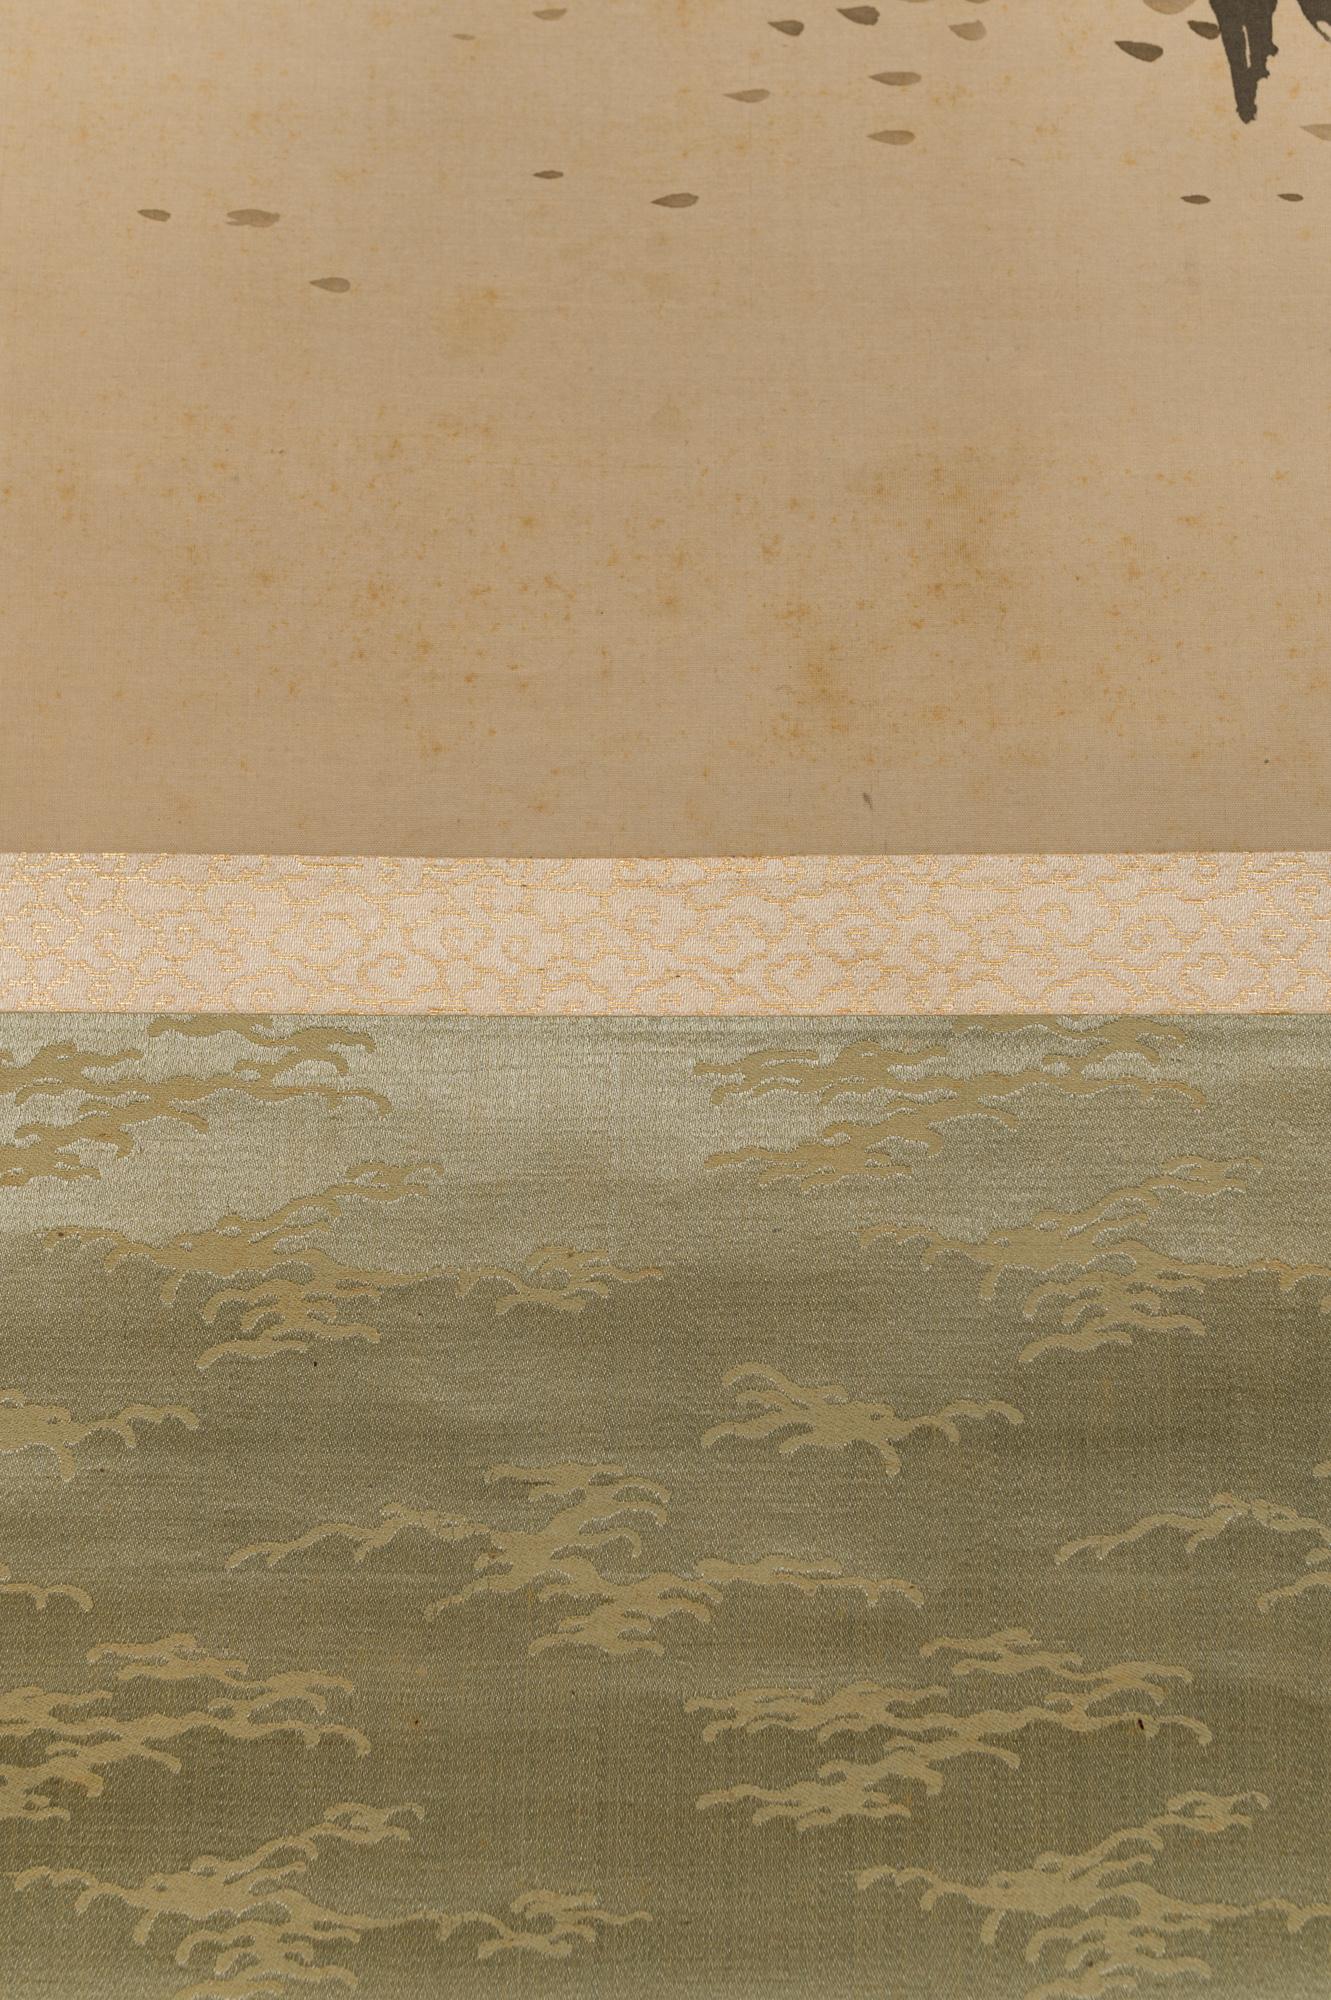 Taisho Period Scroll of Winter Trees 4